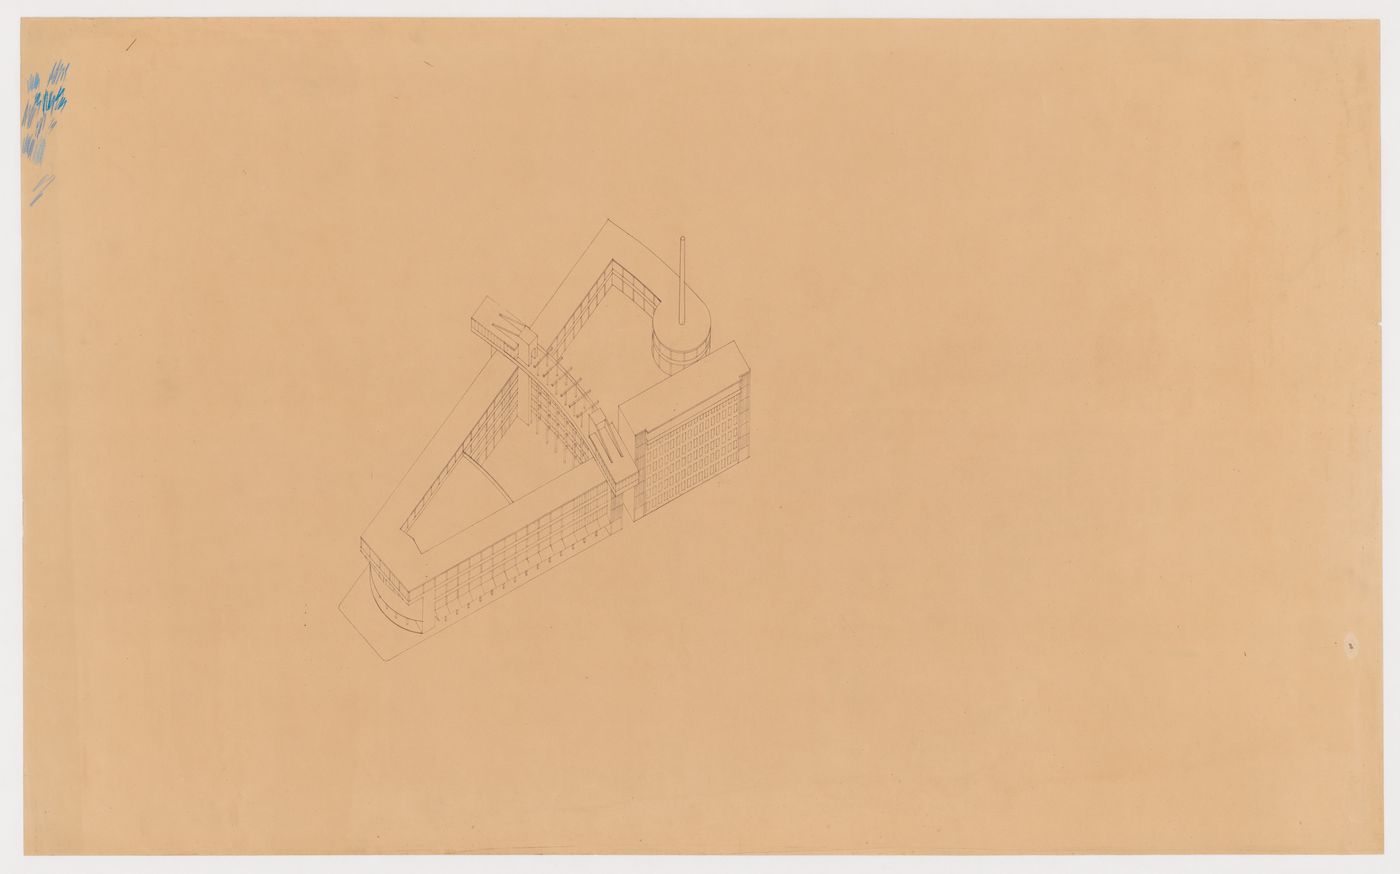 Axonometric for the 1926 design for People's University, Rotterdam, Netherlands